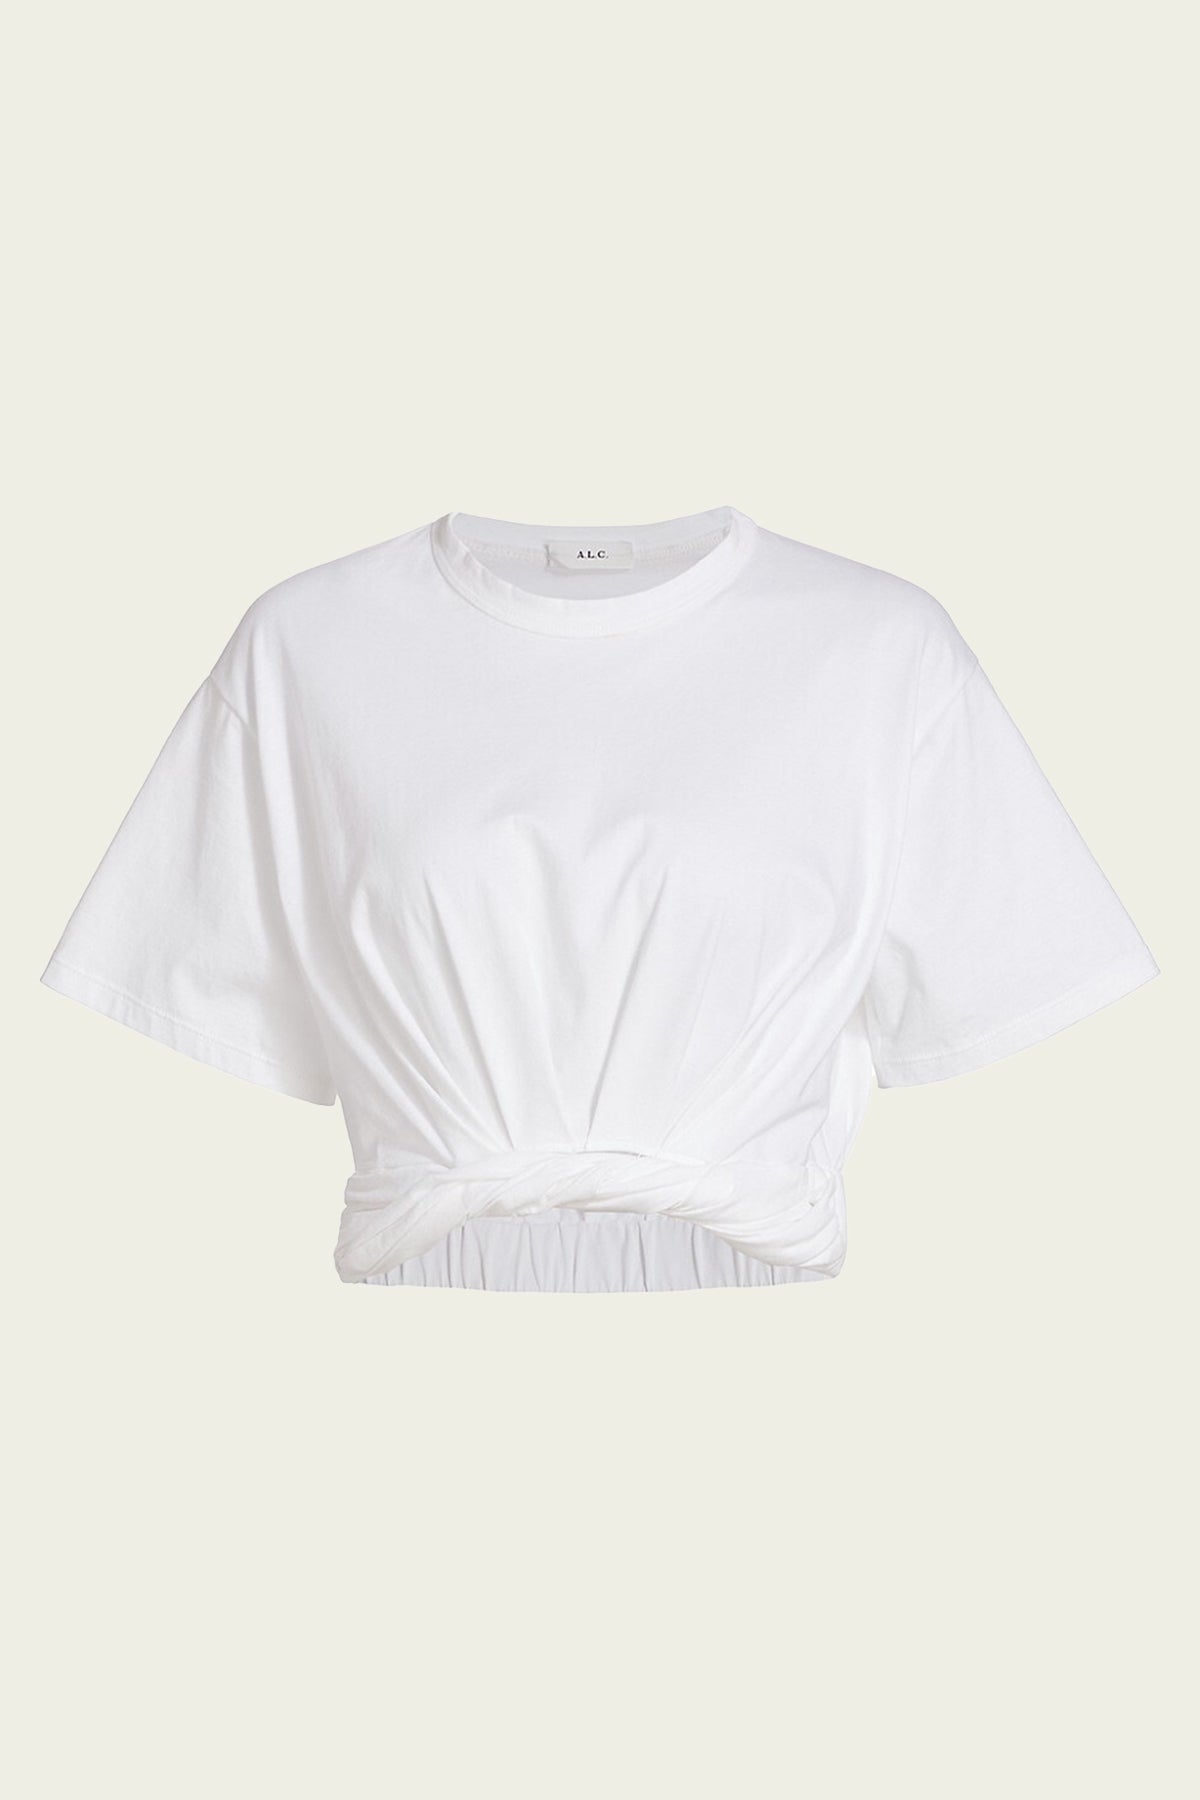 Mimi Cropped Tee in White - shop-olivia.com